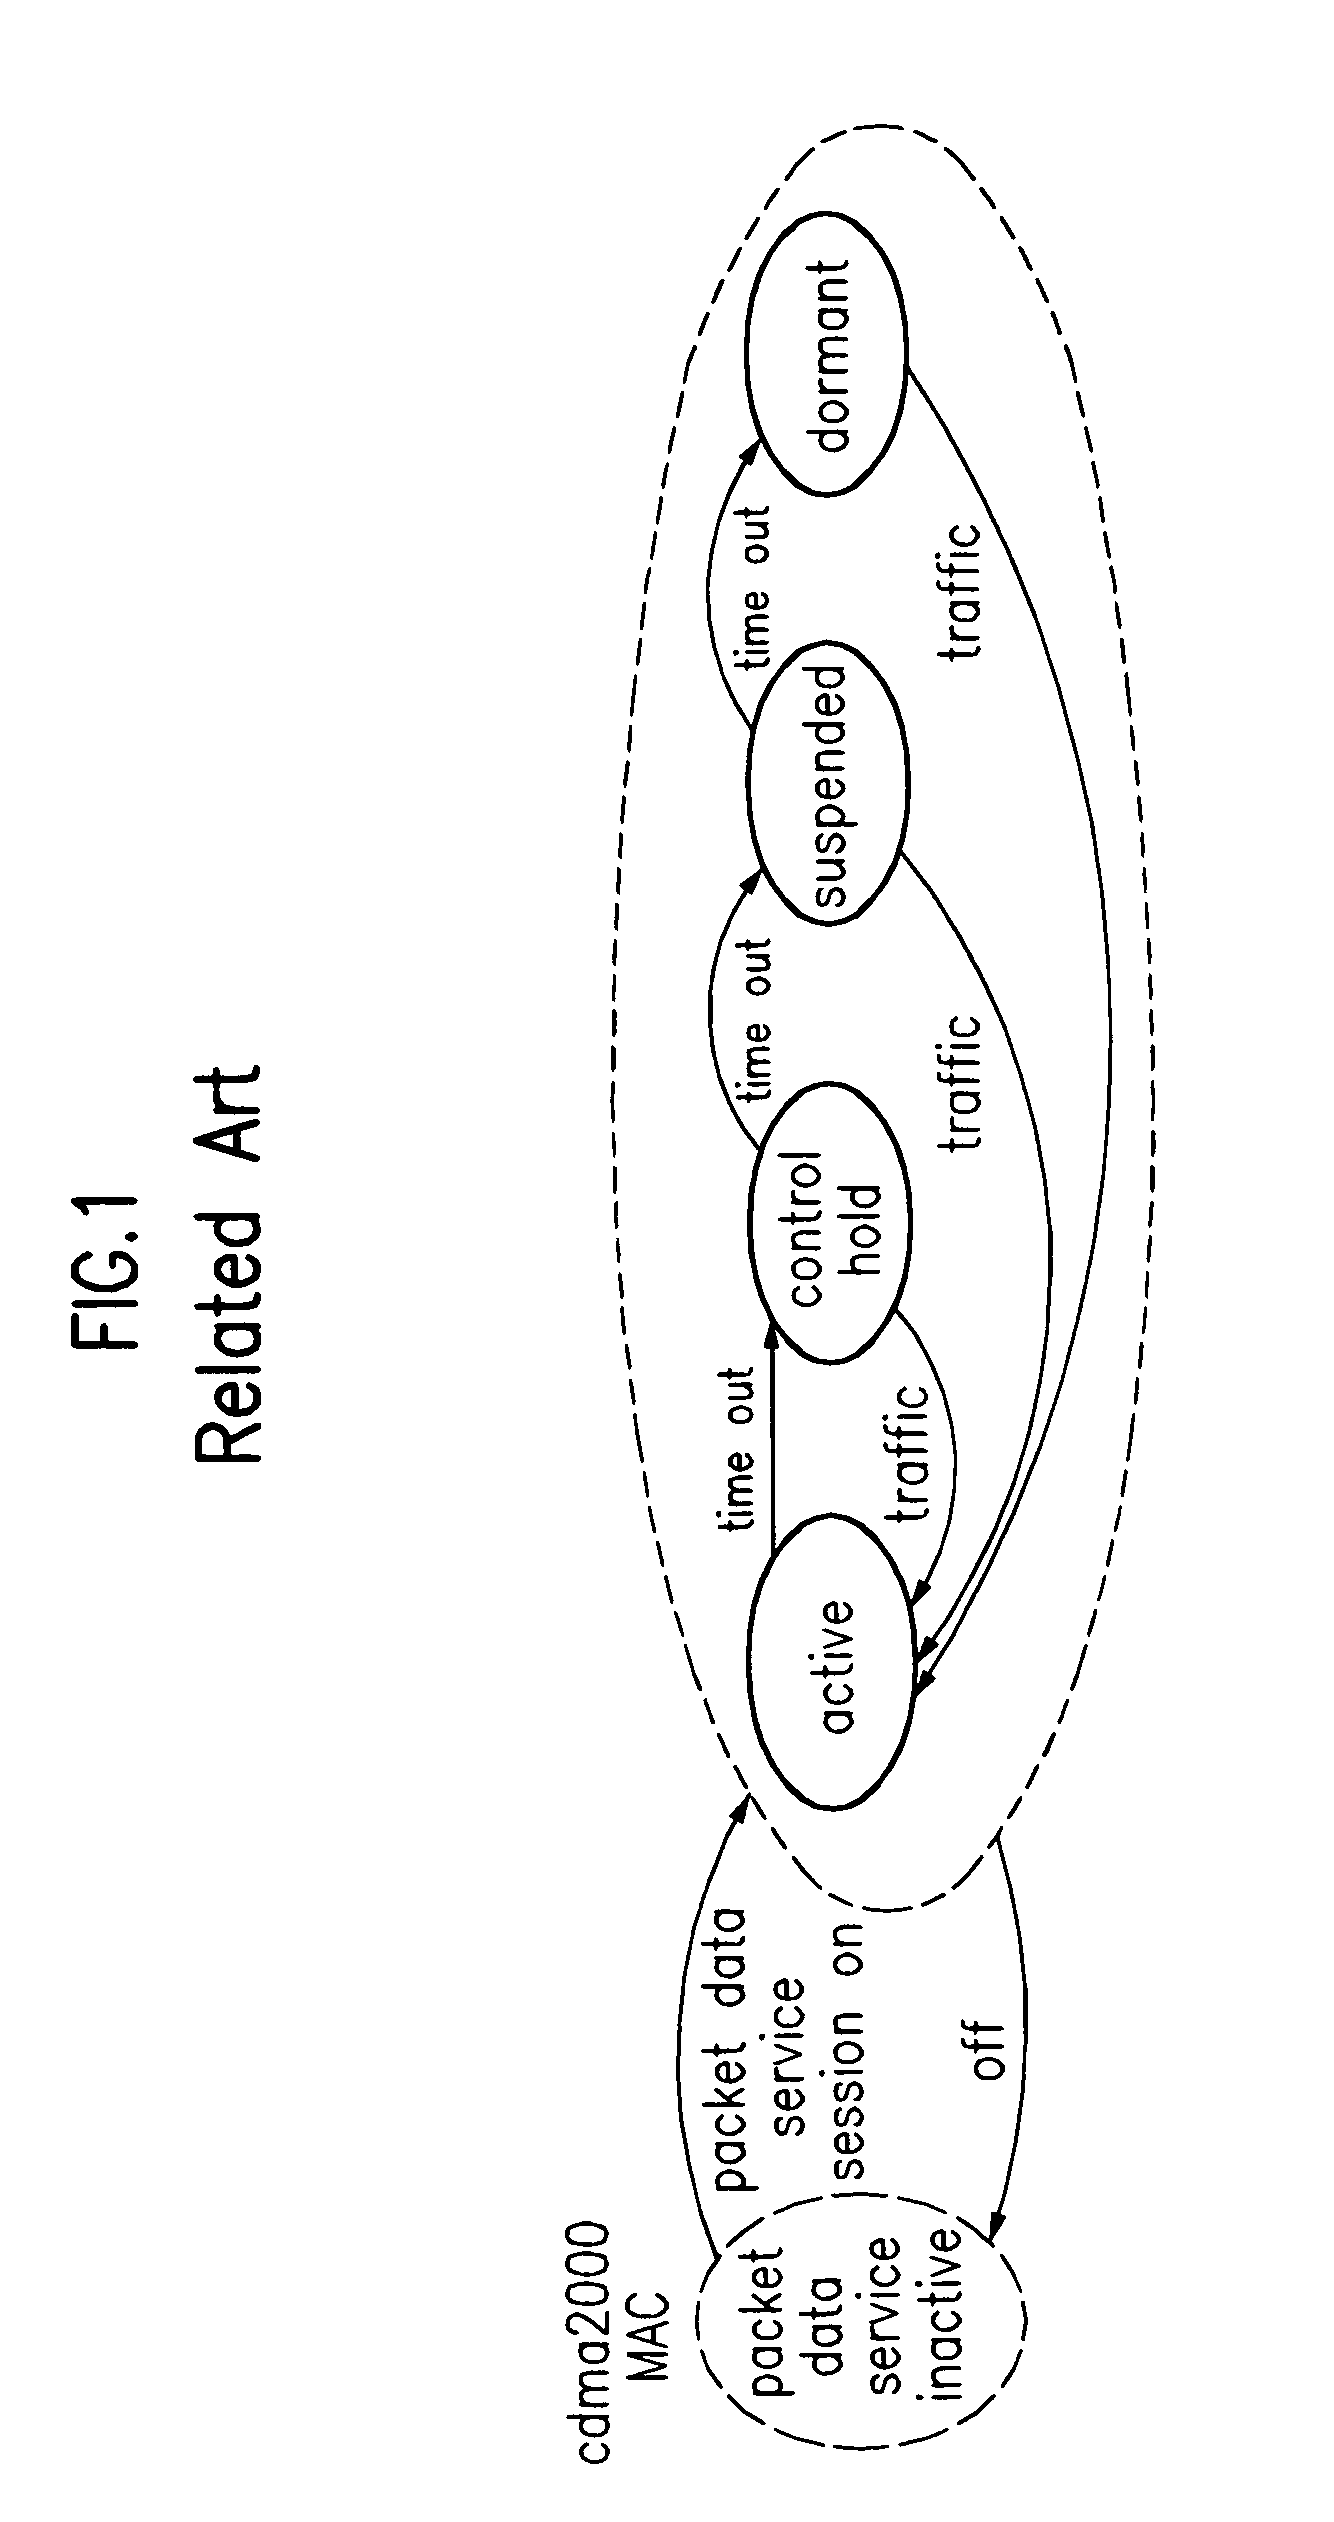 System and method for controlling packet data service in mobile communication network